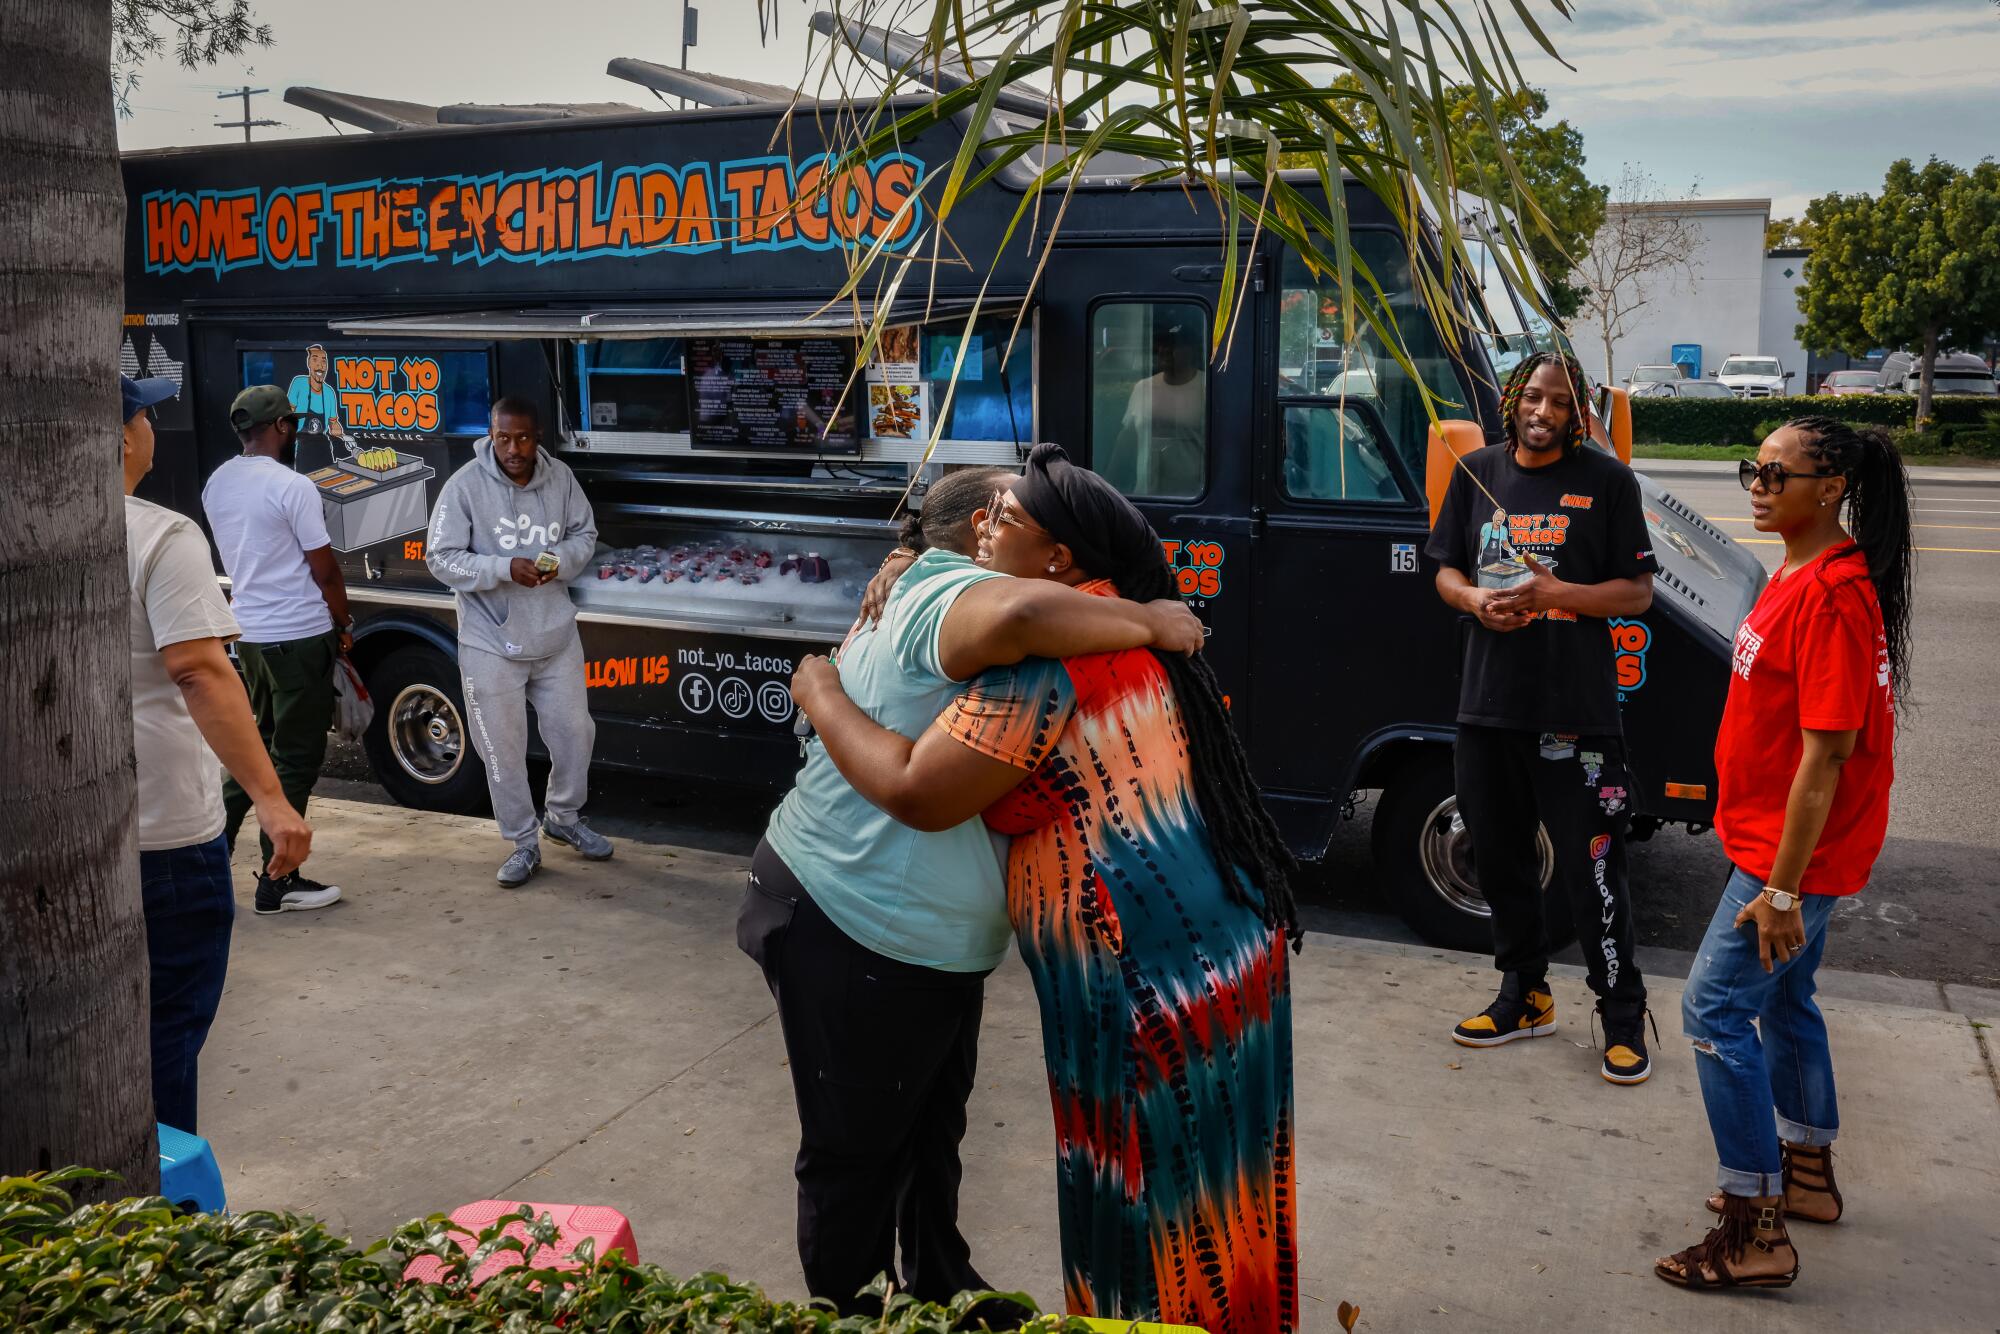 People hug and stand in front of the Not Yo Tacos truck.